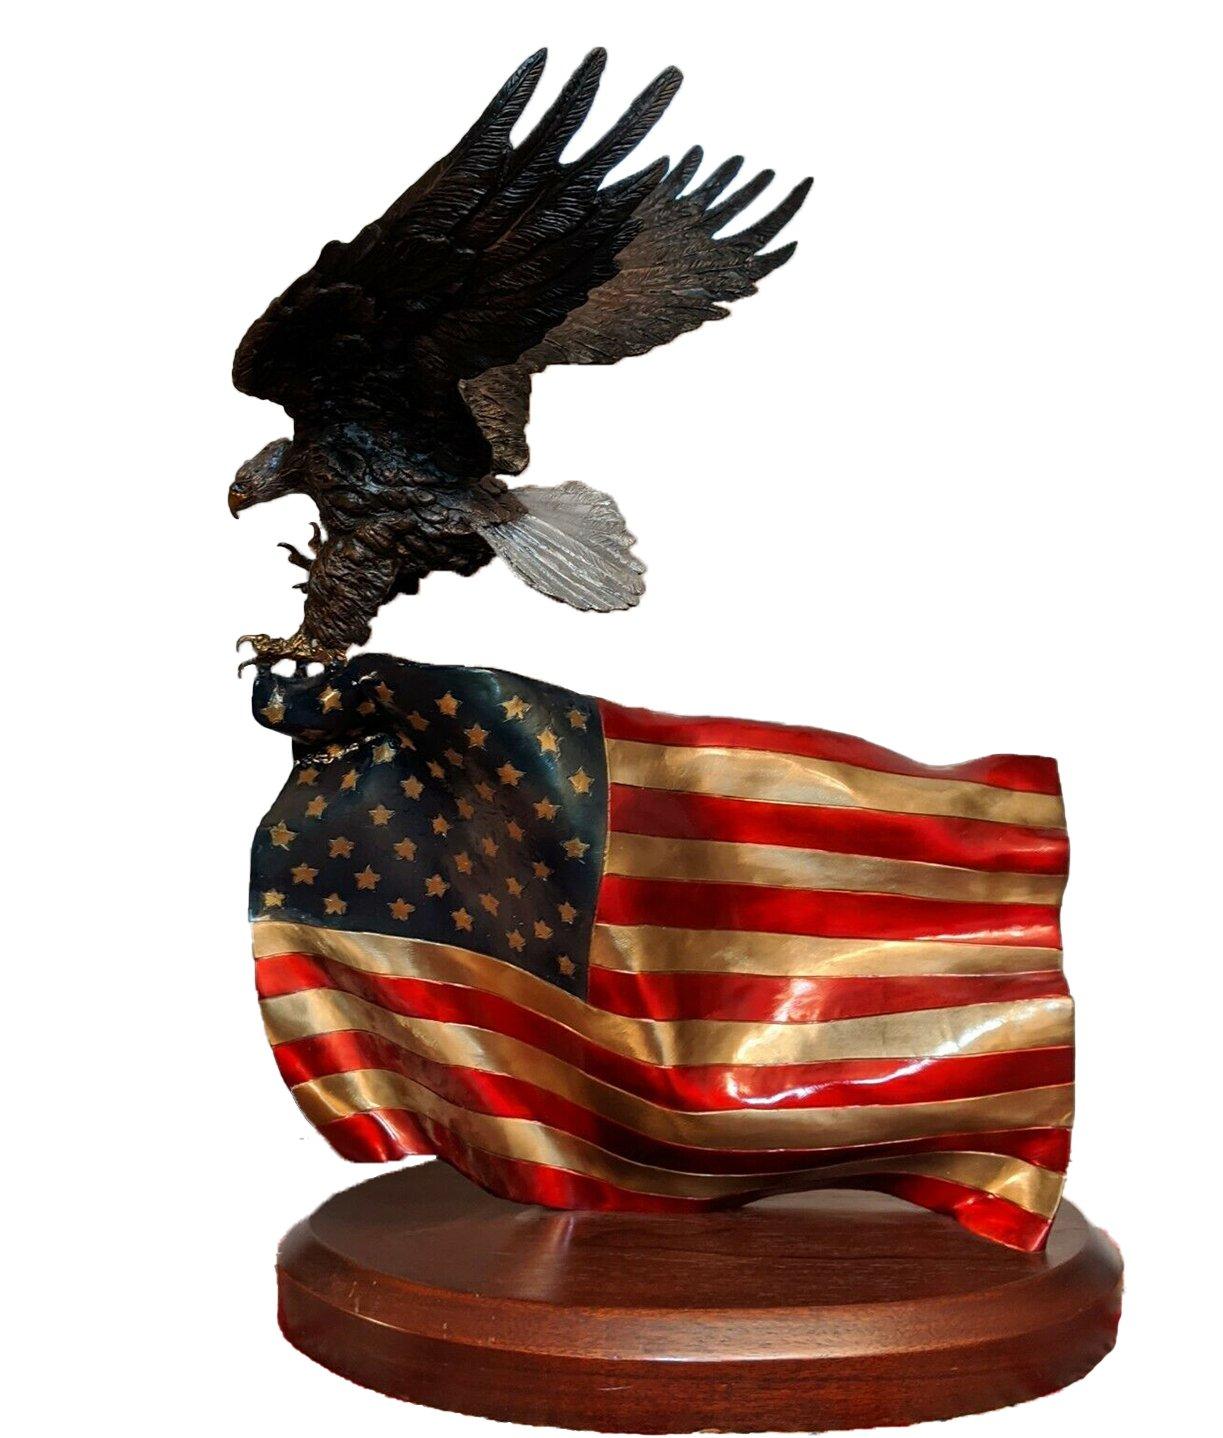 This bronze sculpture by the renowned Lorenzo Ghiglieri is titled Flying Colors. Created in 2001, the bronze features a bald eagle soaring determinedly while clutching the American Flag with its talon. The bronze is wonderfully detailed to show the